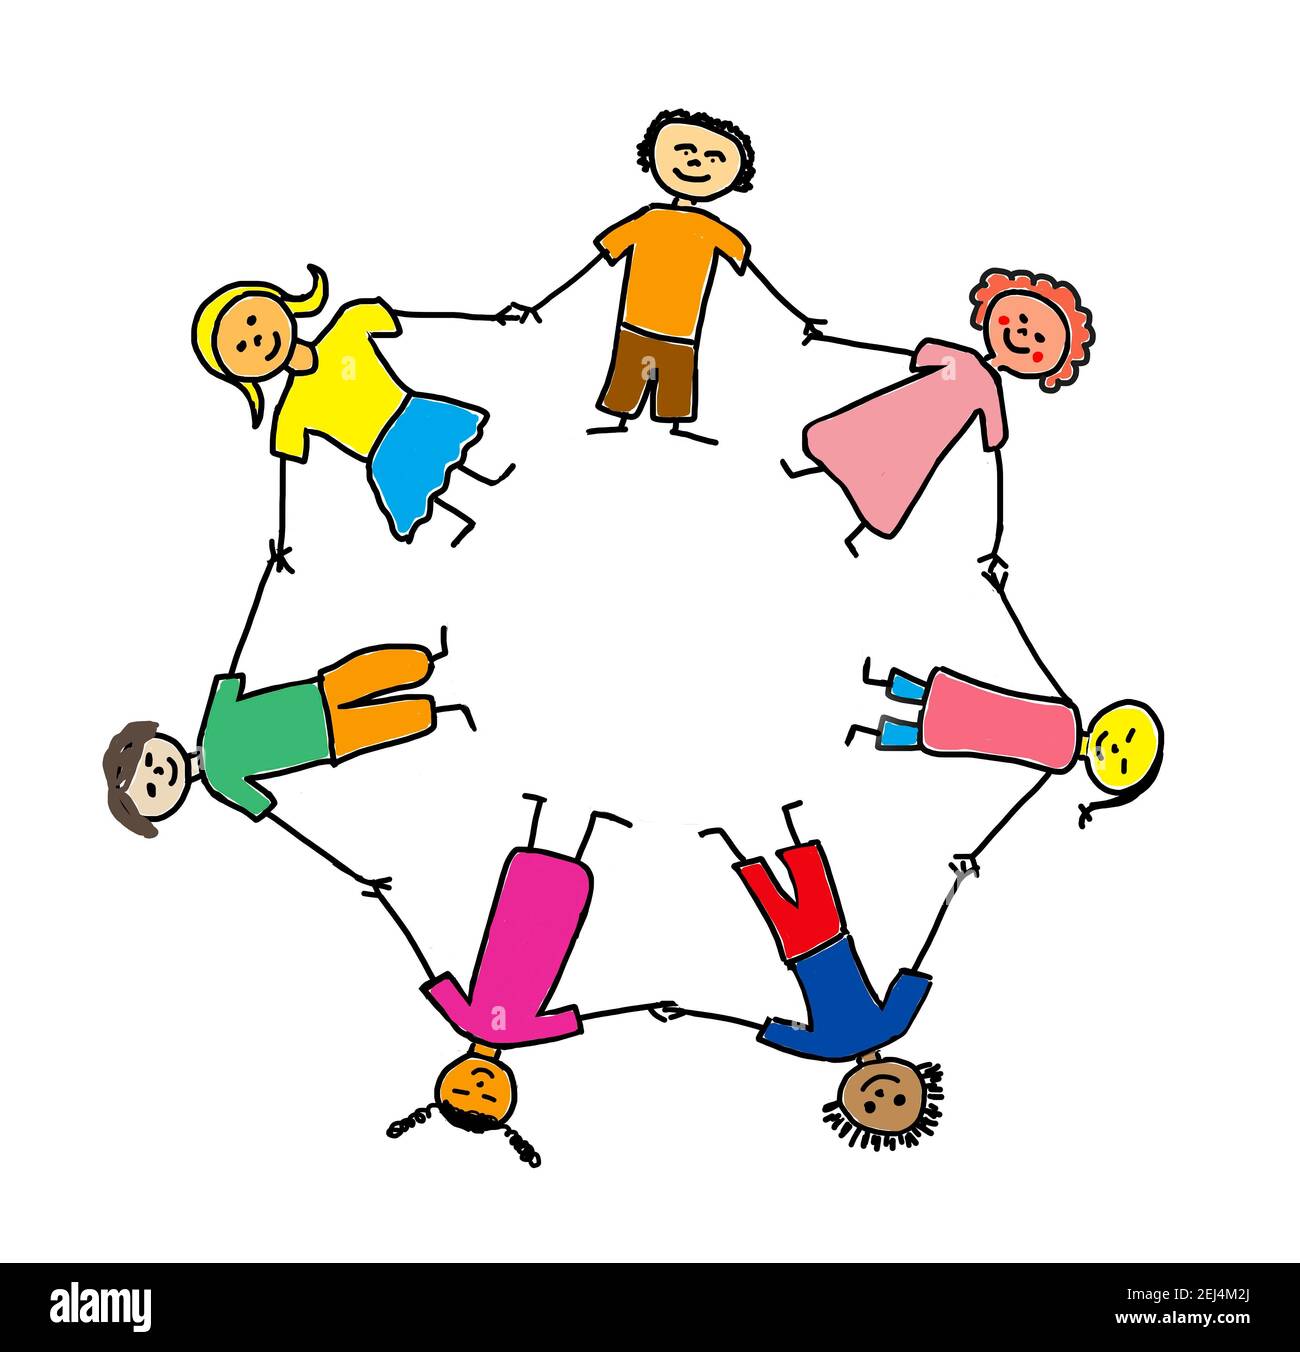 Naive illustration, children drawing, children of different nationalities standing happily hand in hand in circle Stock Photo